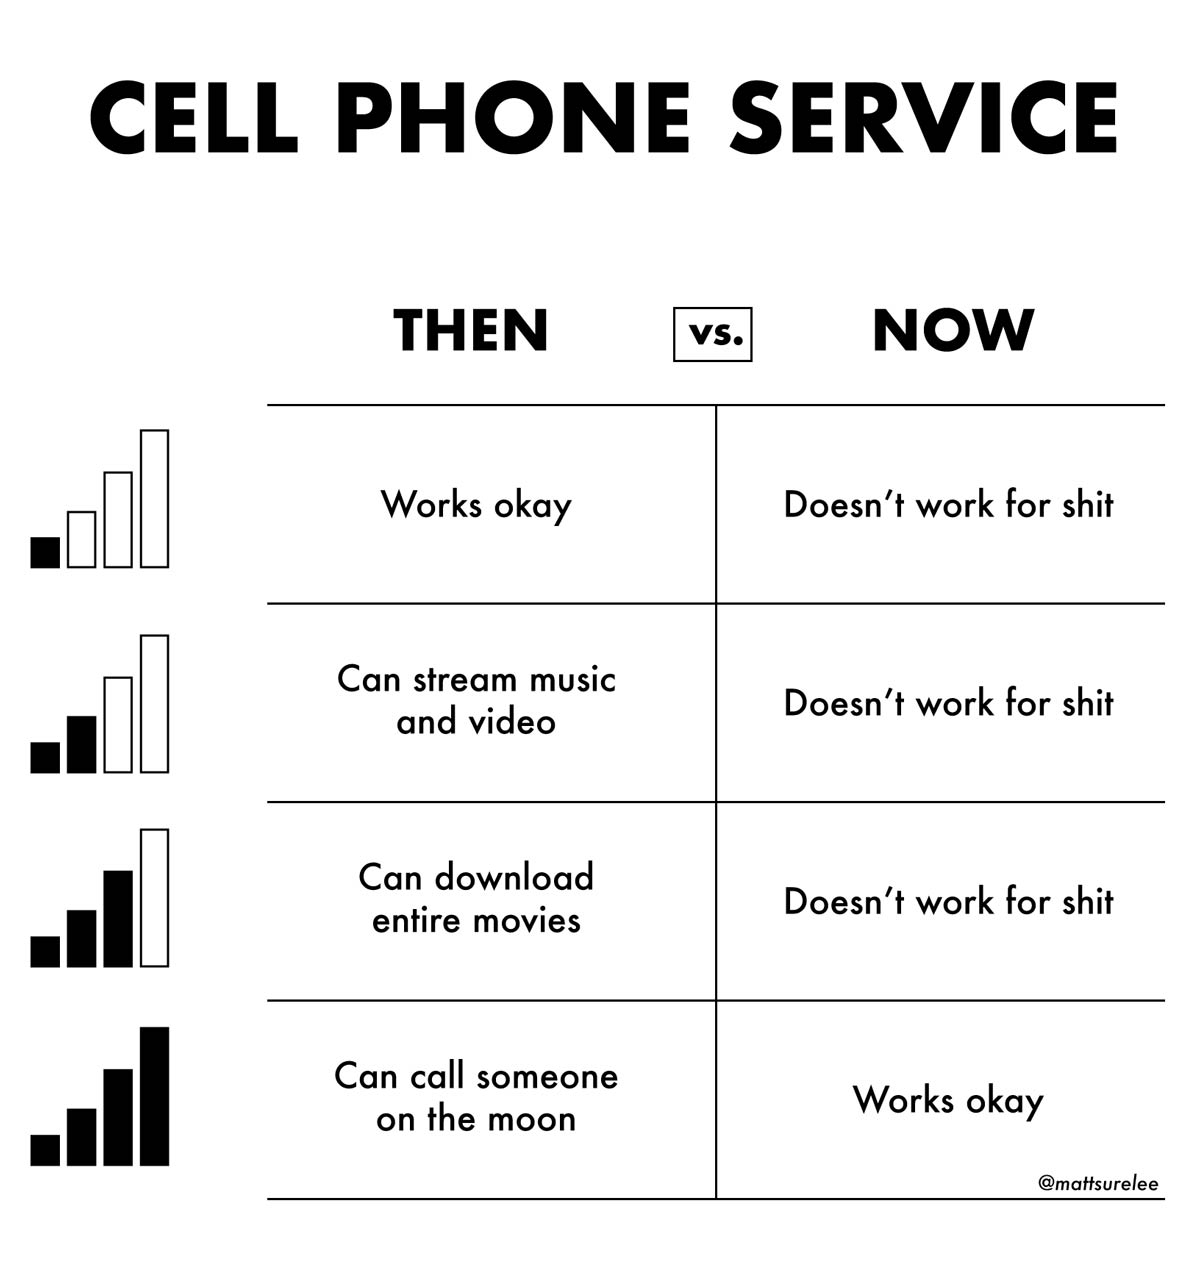 Cell Phone Service Then vs. Now